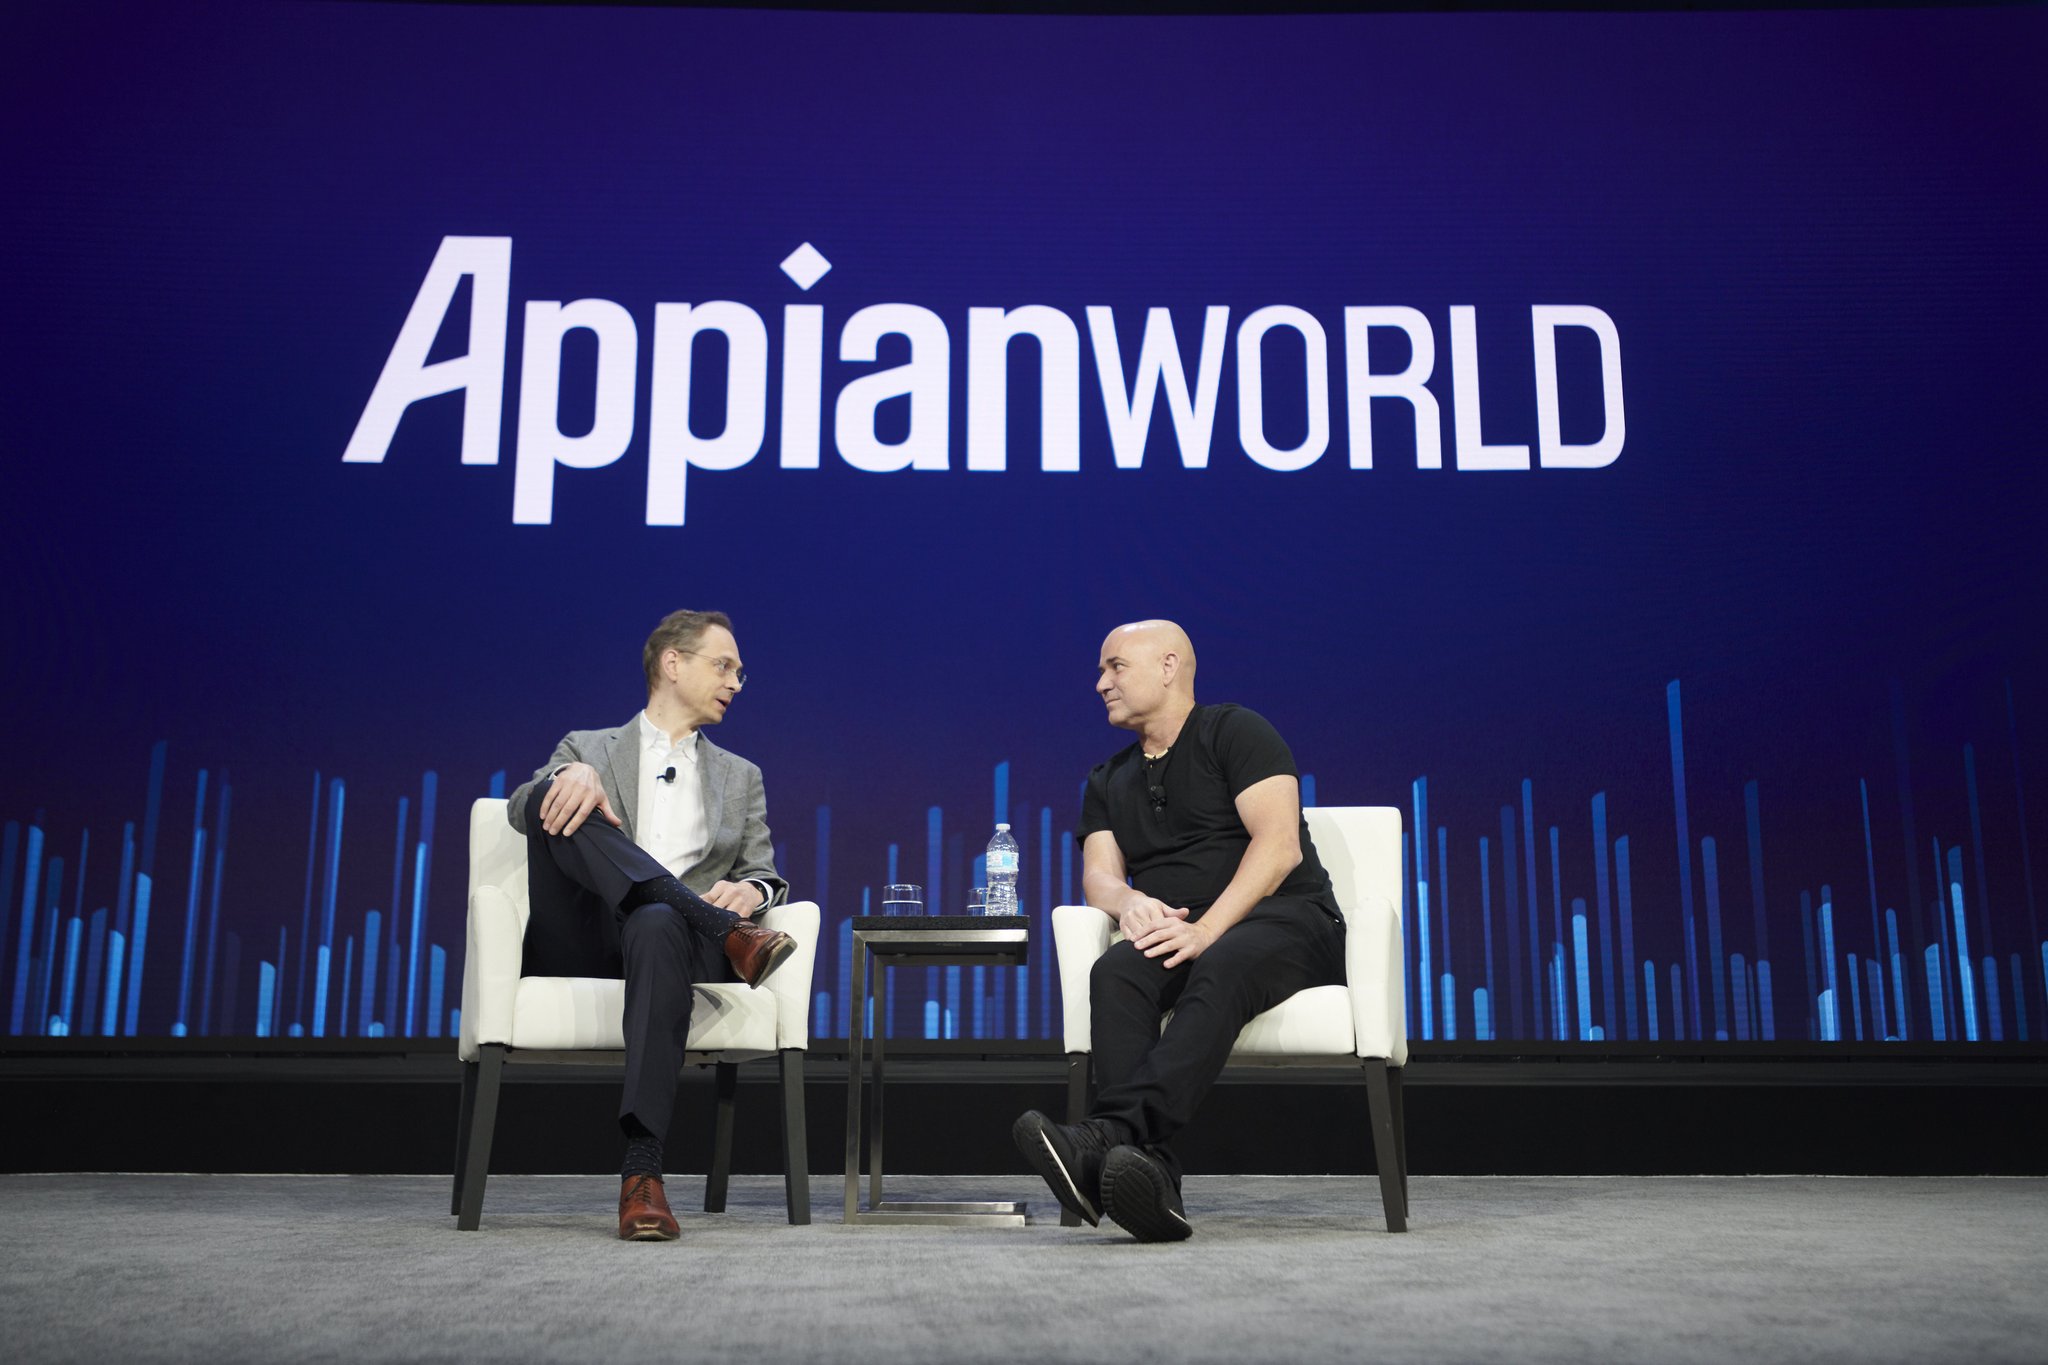 Appian World 2019: why banks need low-code tech - FinTech Futures